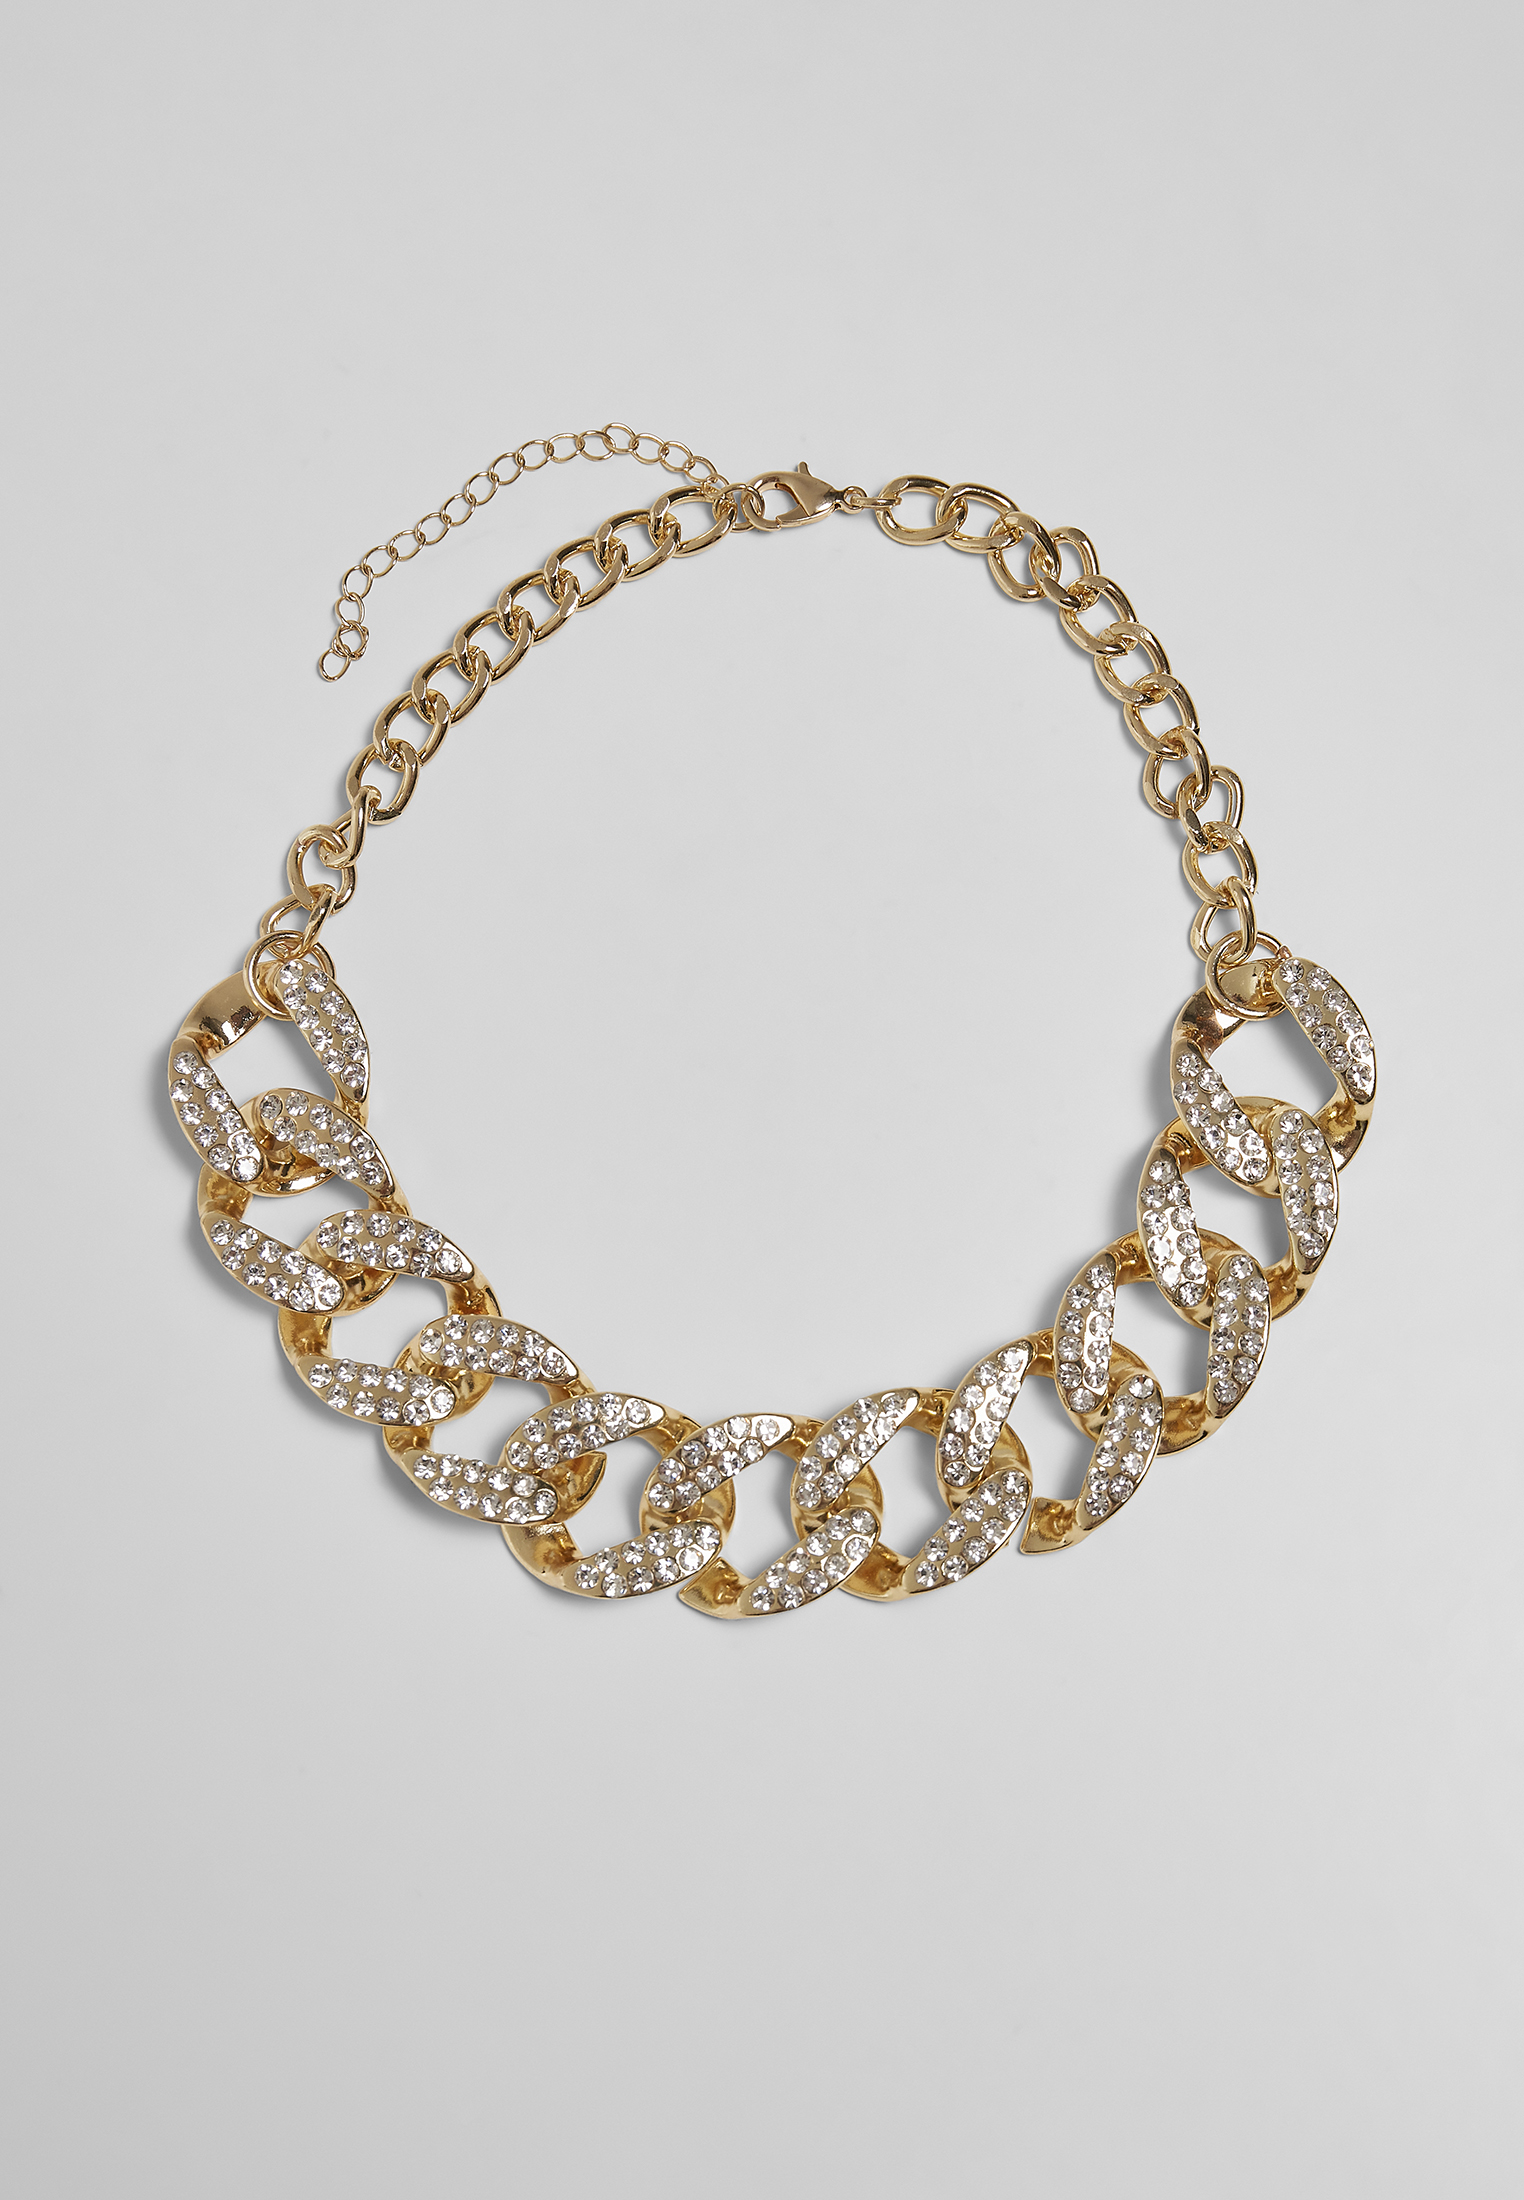 Statement Necklace - Gold Color